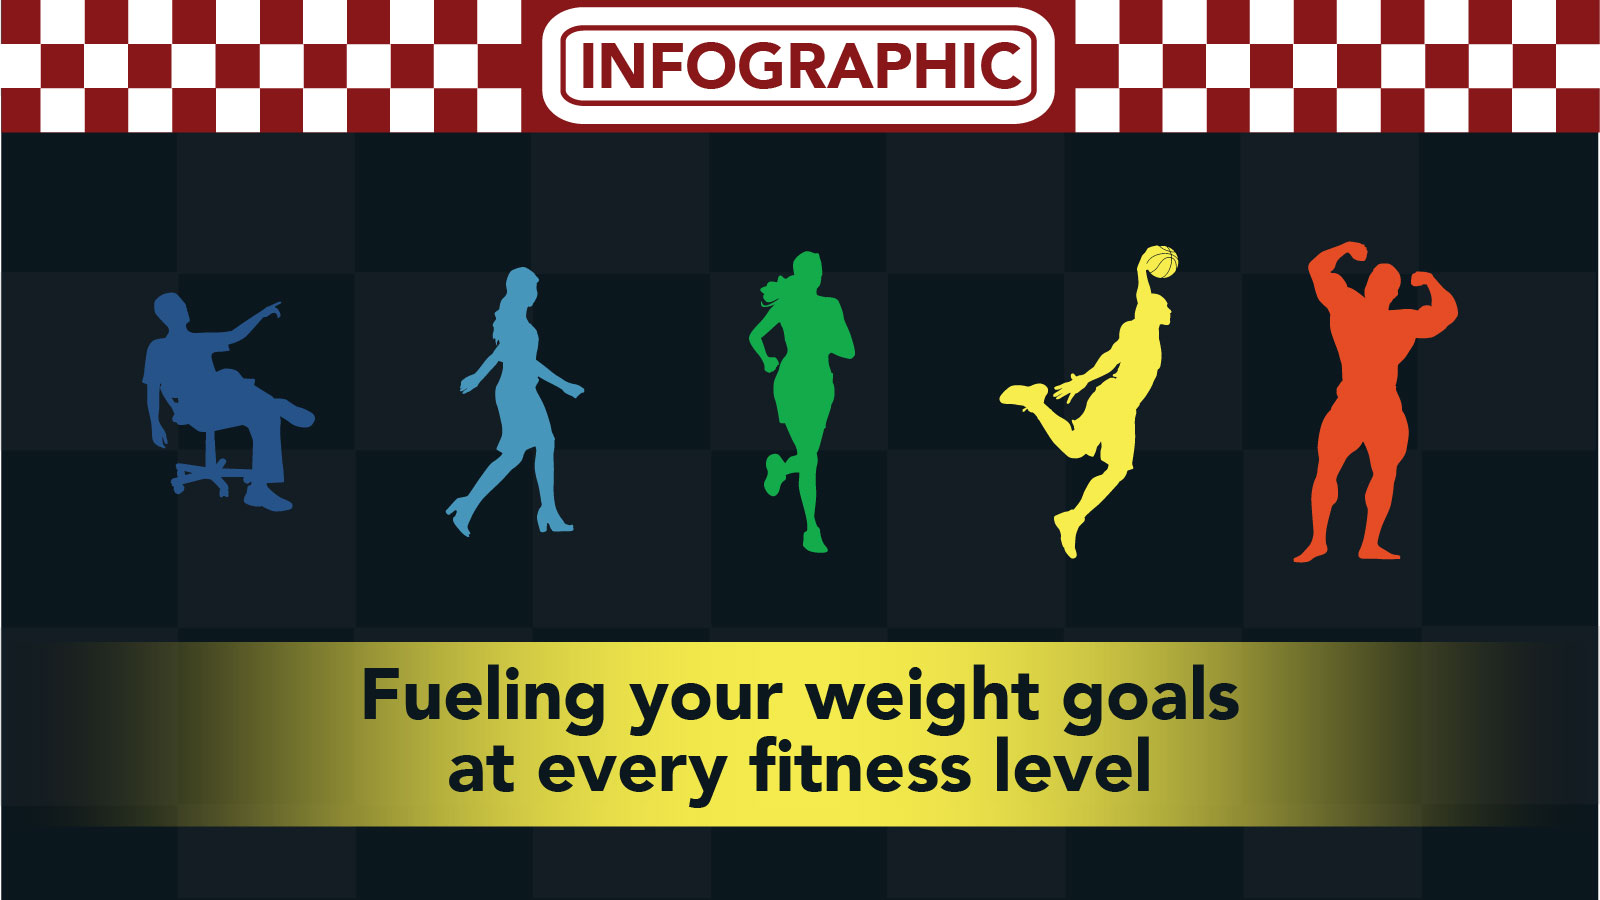 weight loss, fuel, goals, infographic